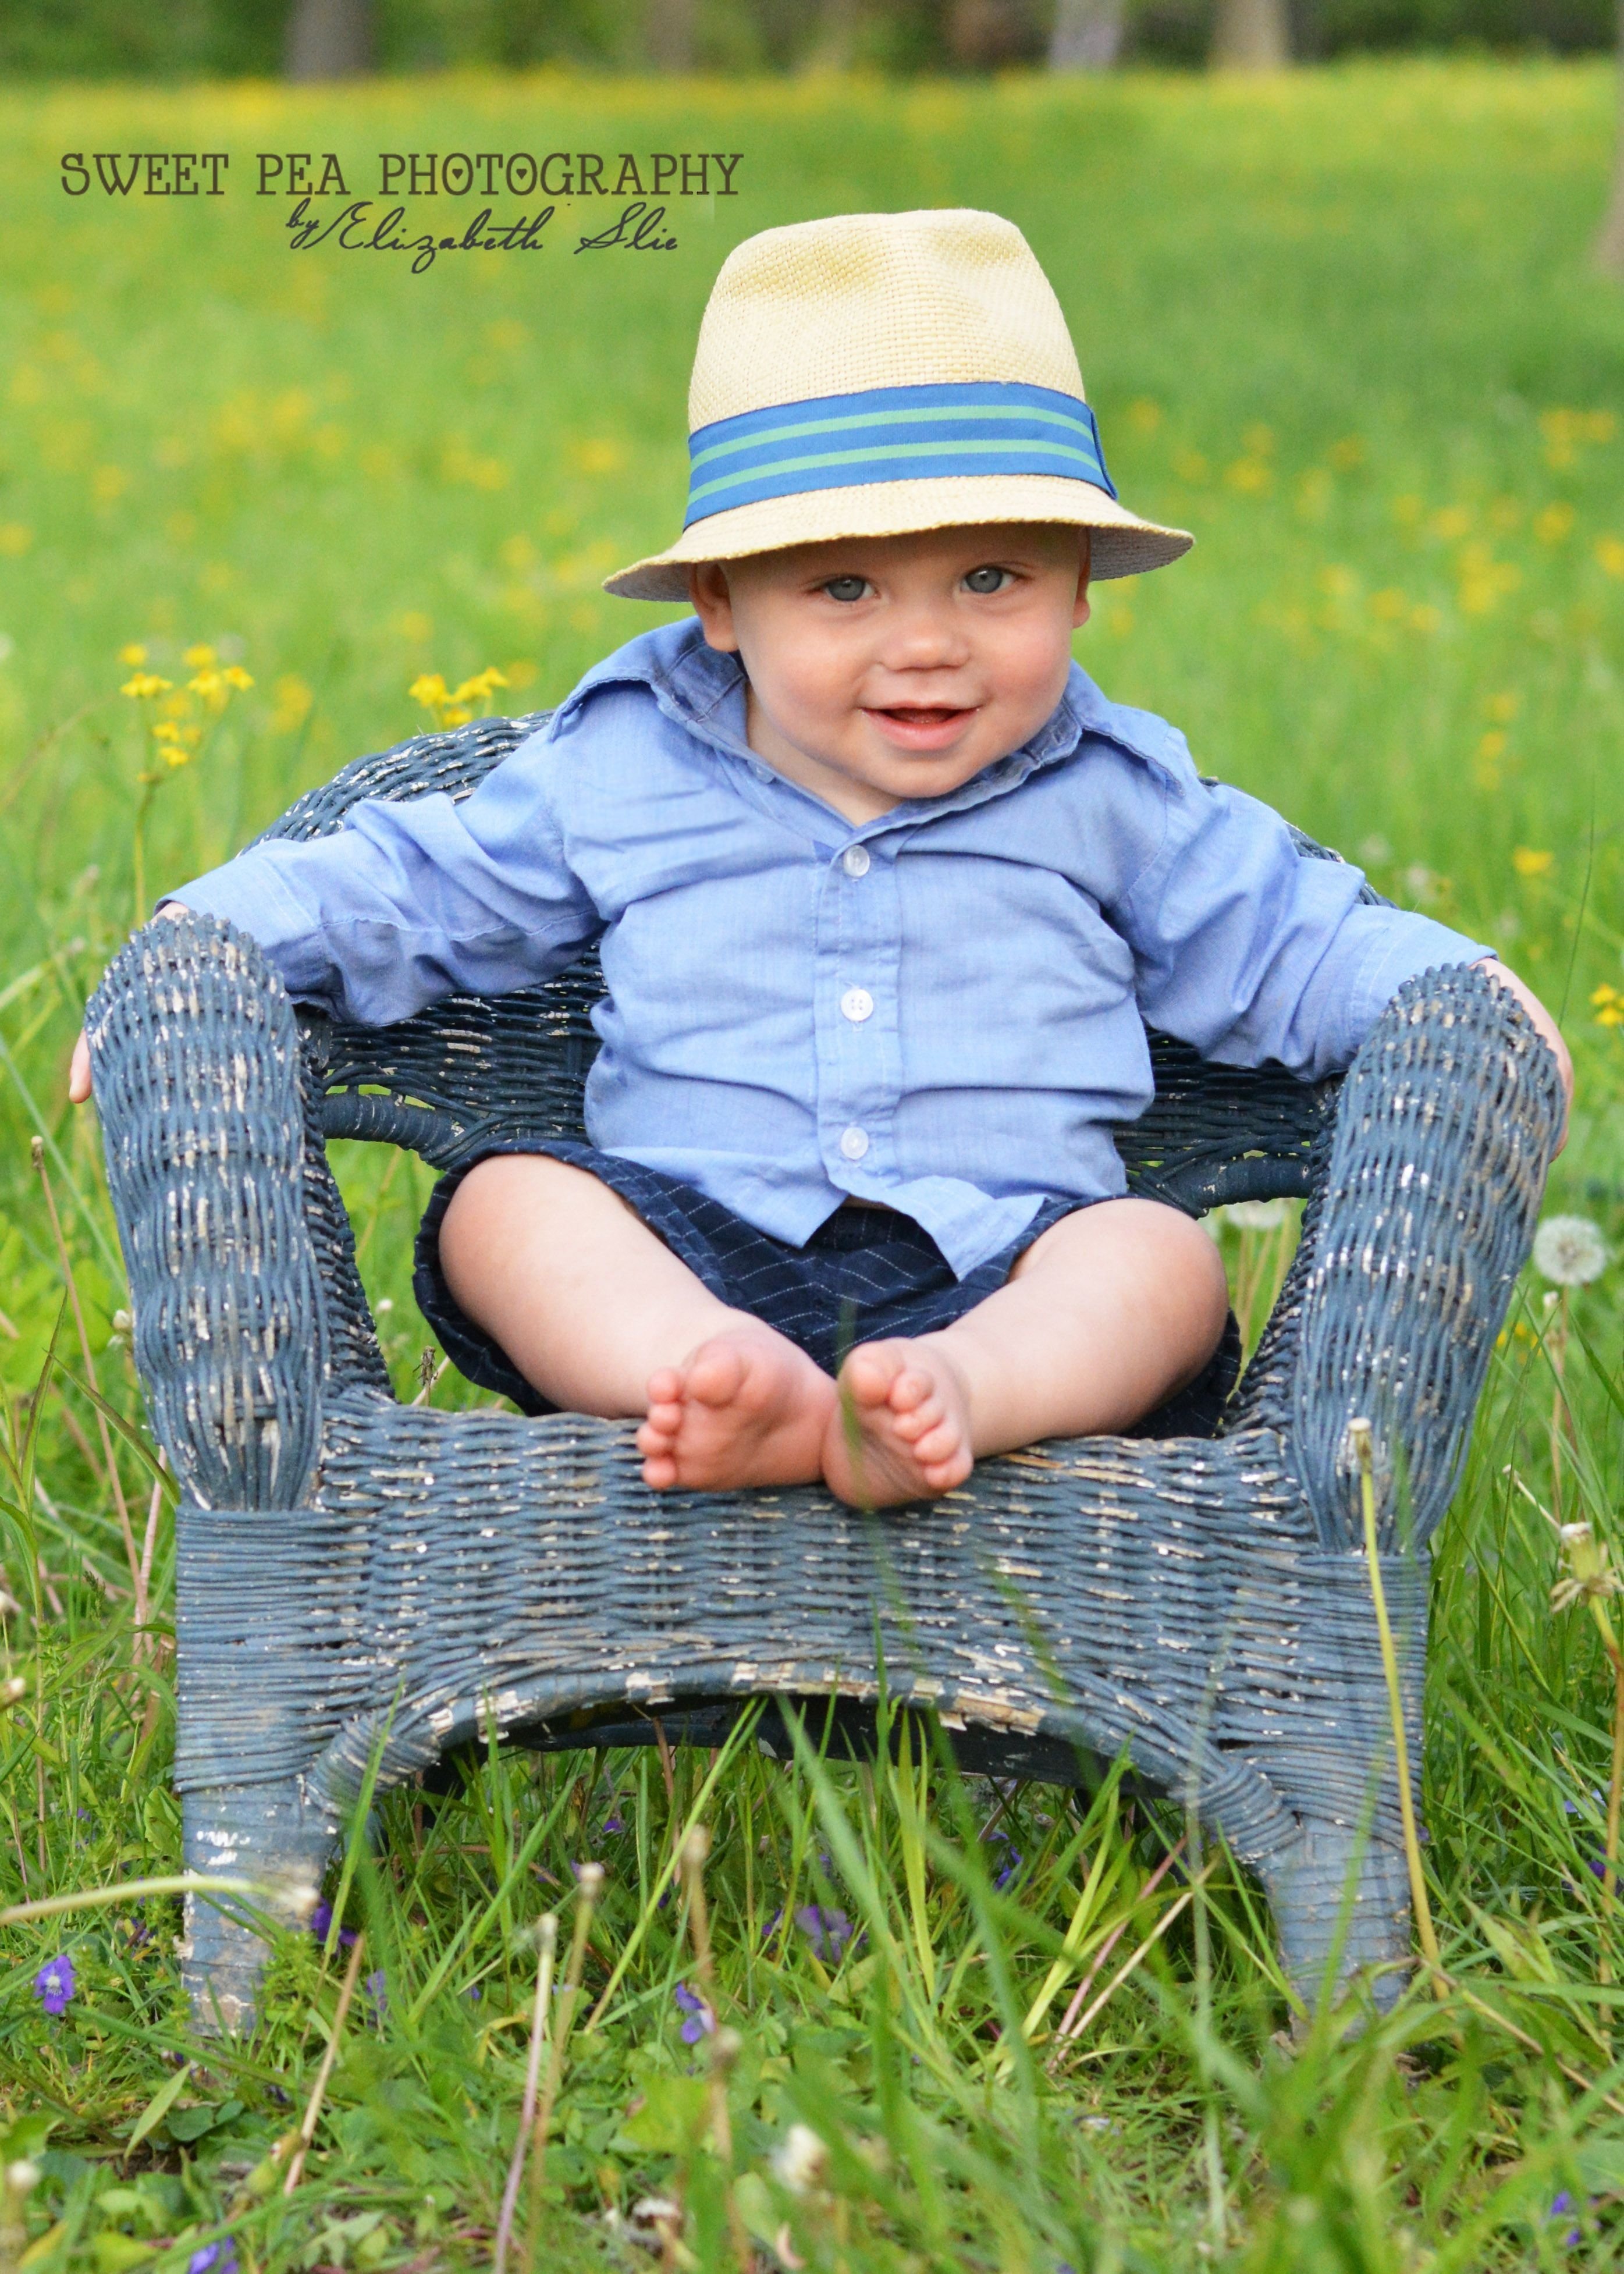 10 Attractive 1 Year Old Picture Ideas one year old boy birthday photo shoot ideas 1 year old country 3 2022